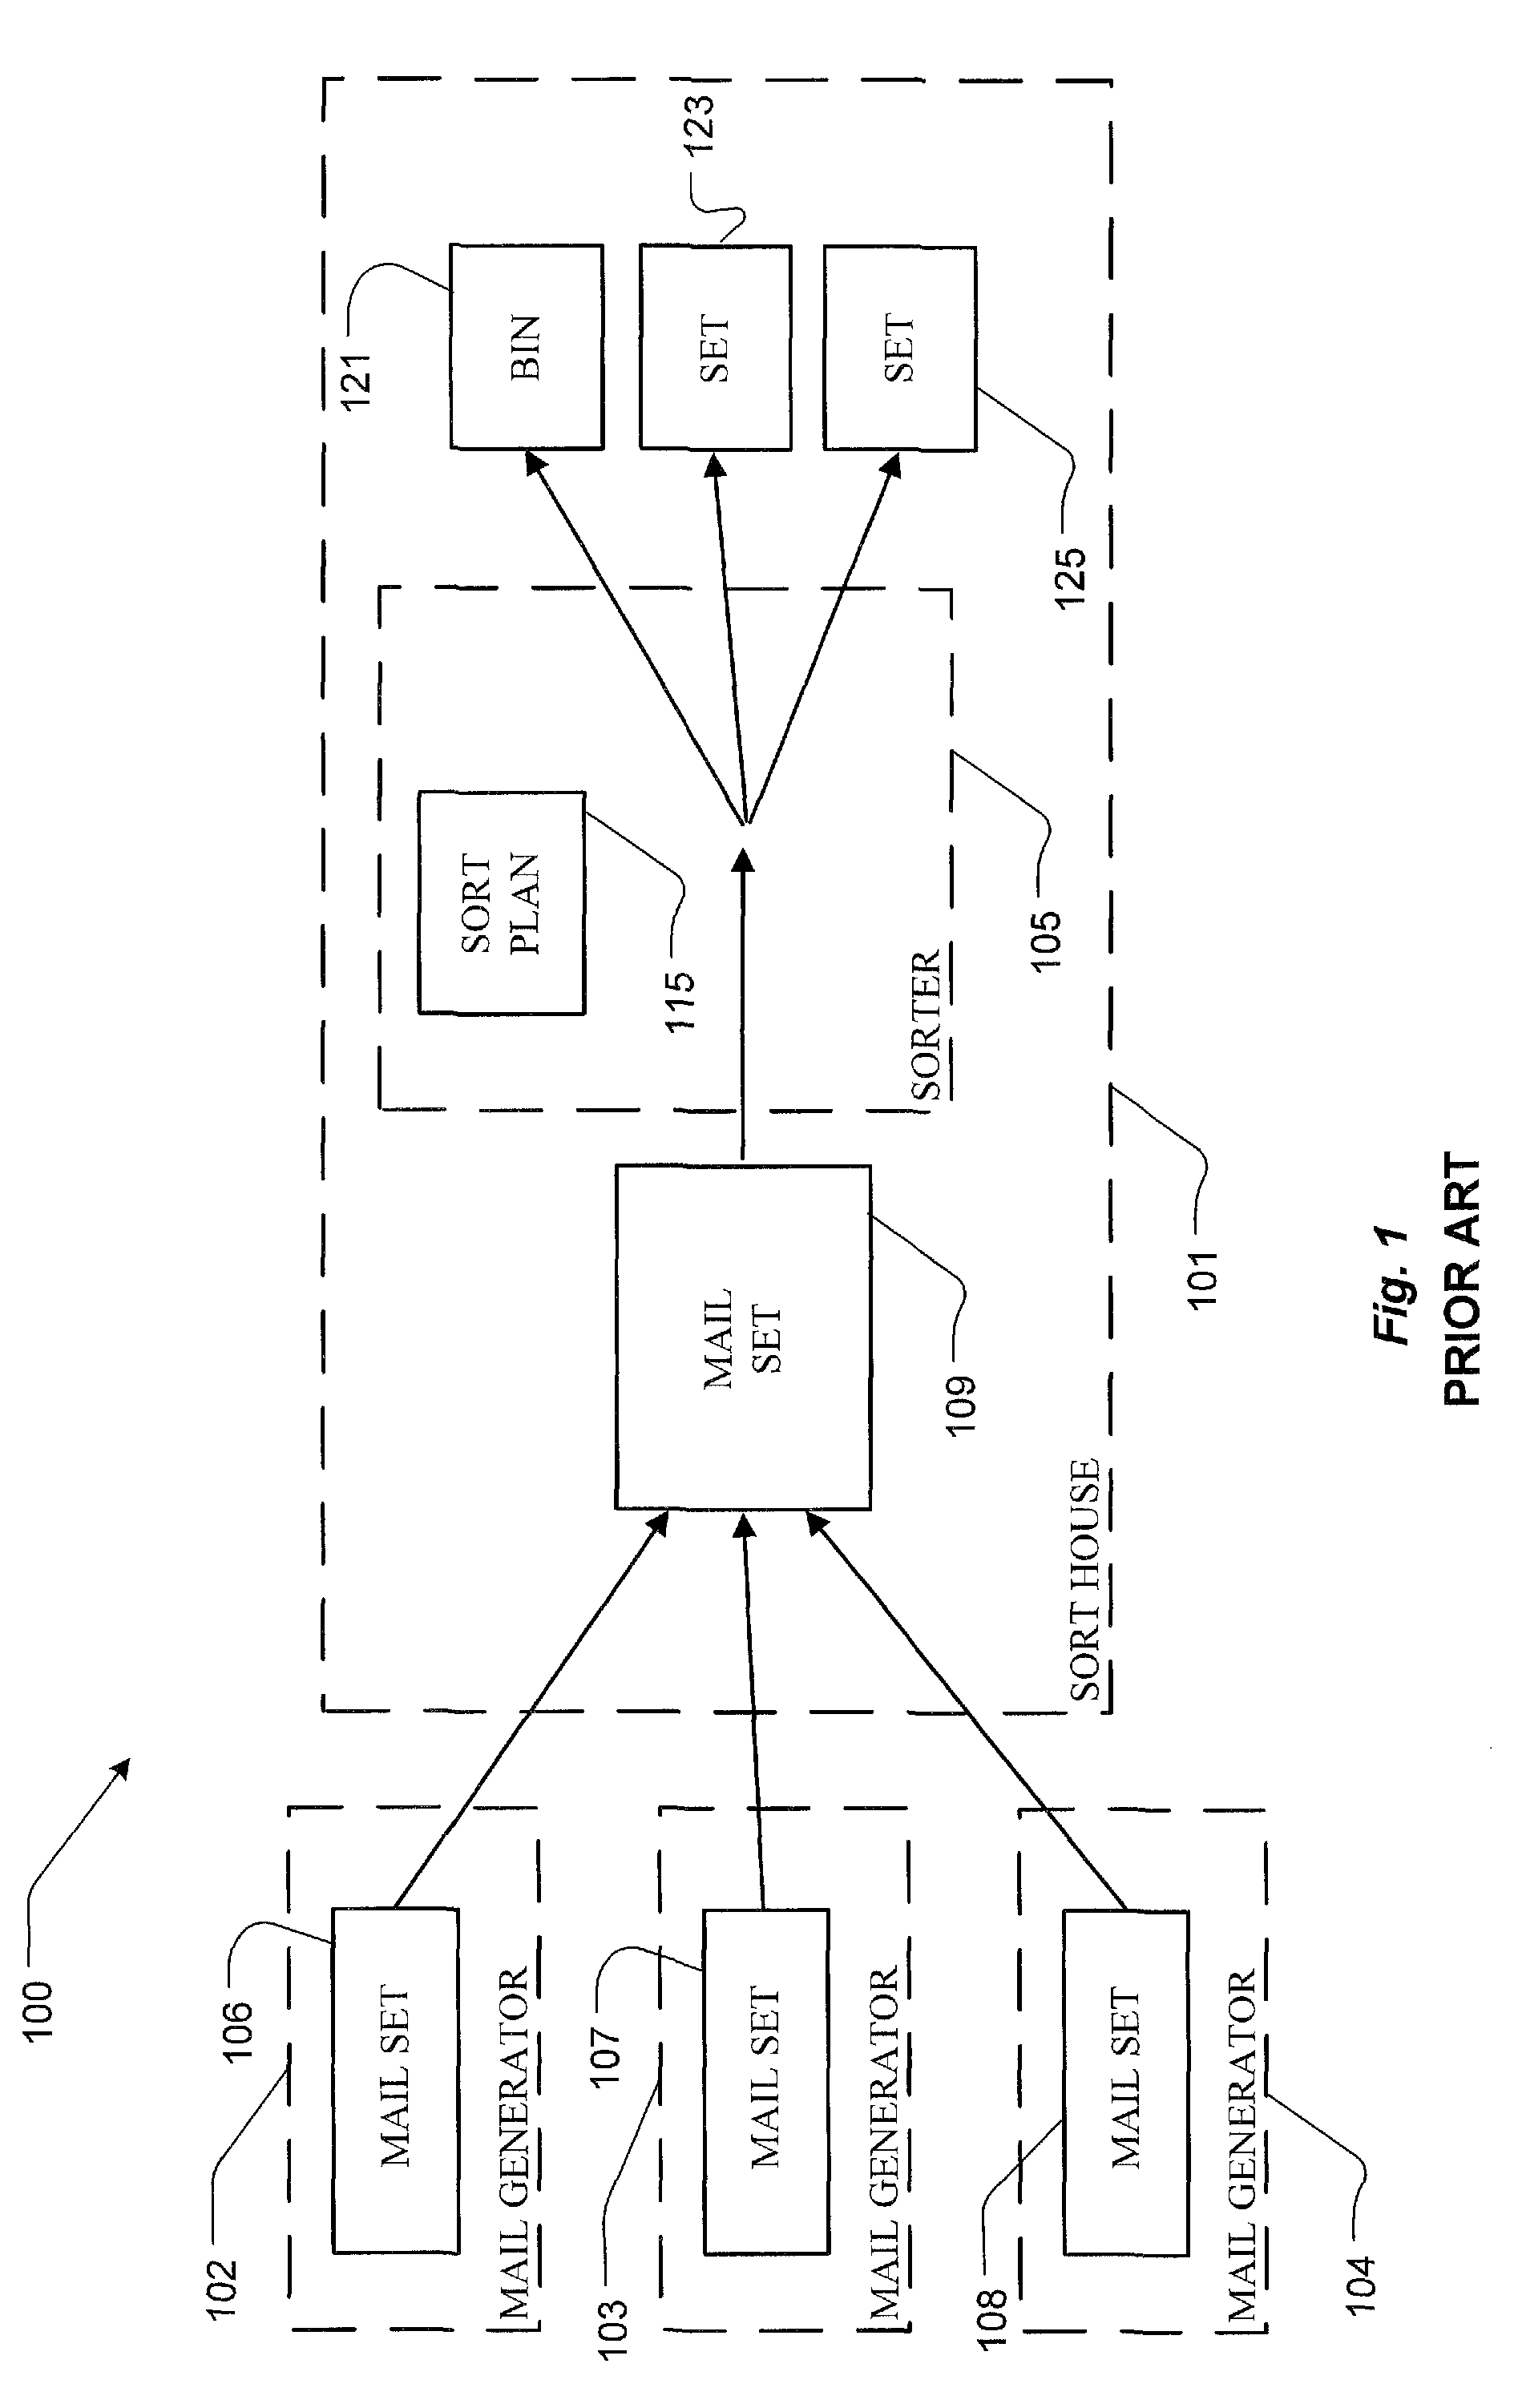 System and method for optimizing a mail document sorting machine